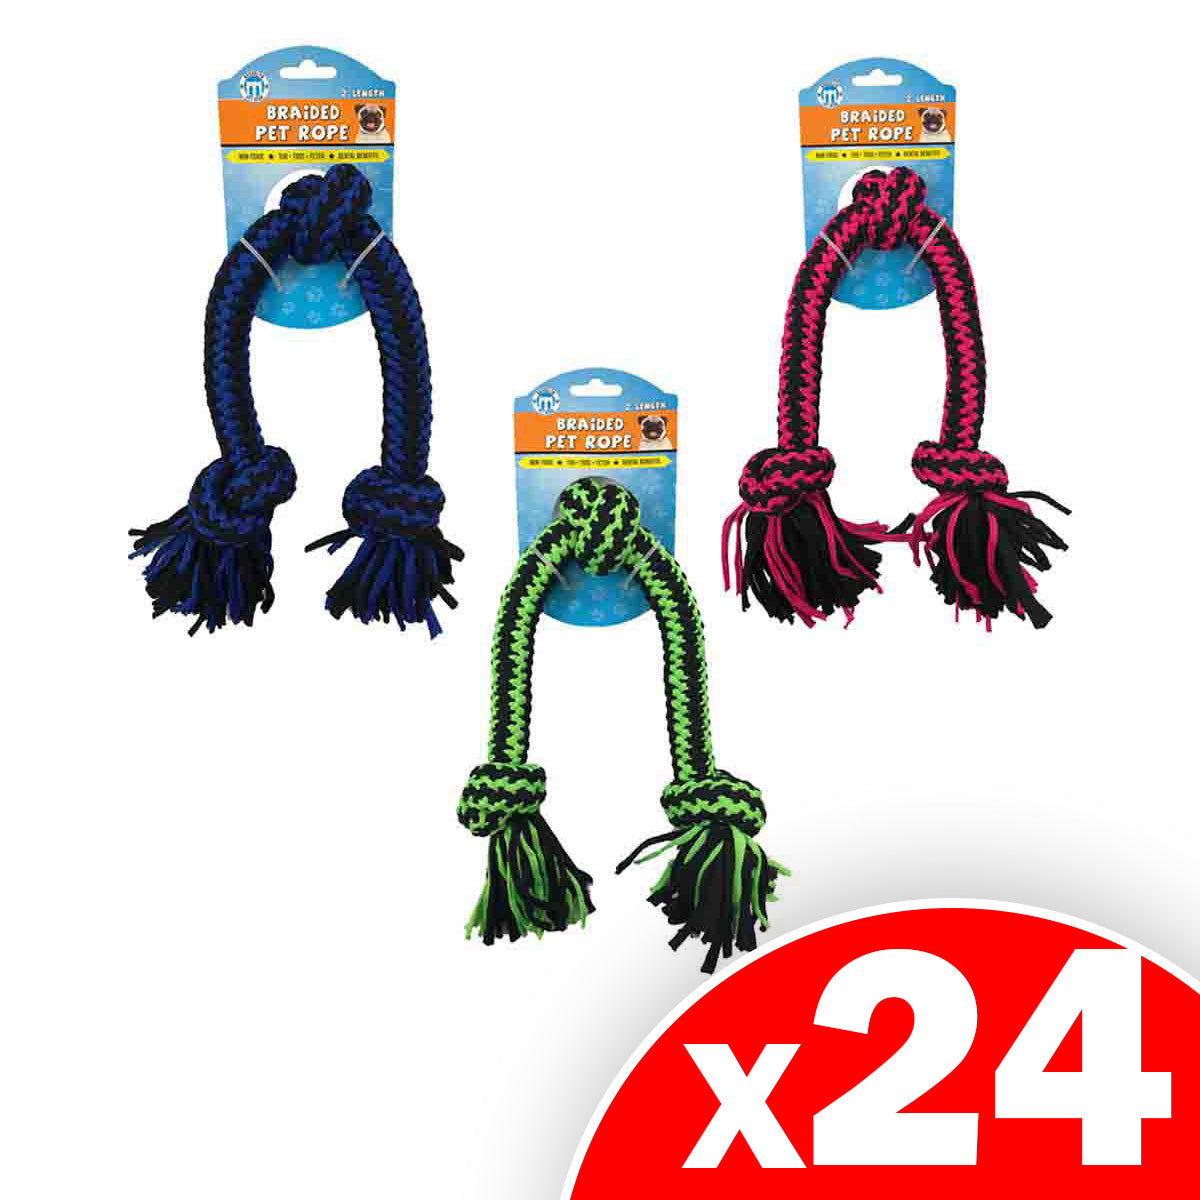 Braided Jersey Rope Toy 36" (Assorted Colors), 24 Pack